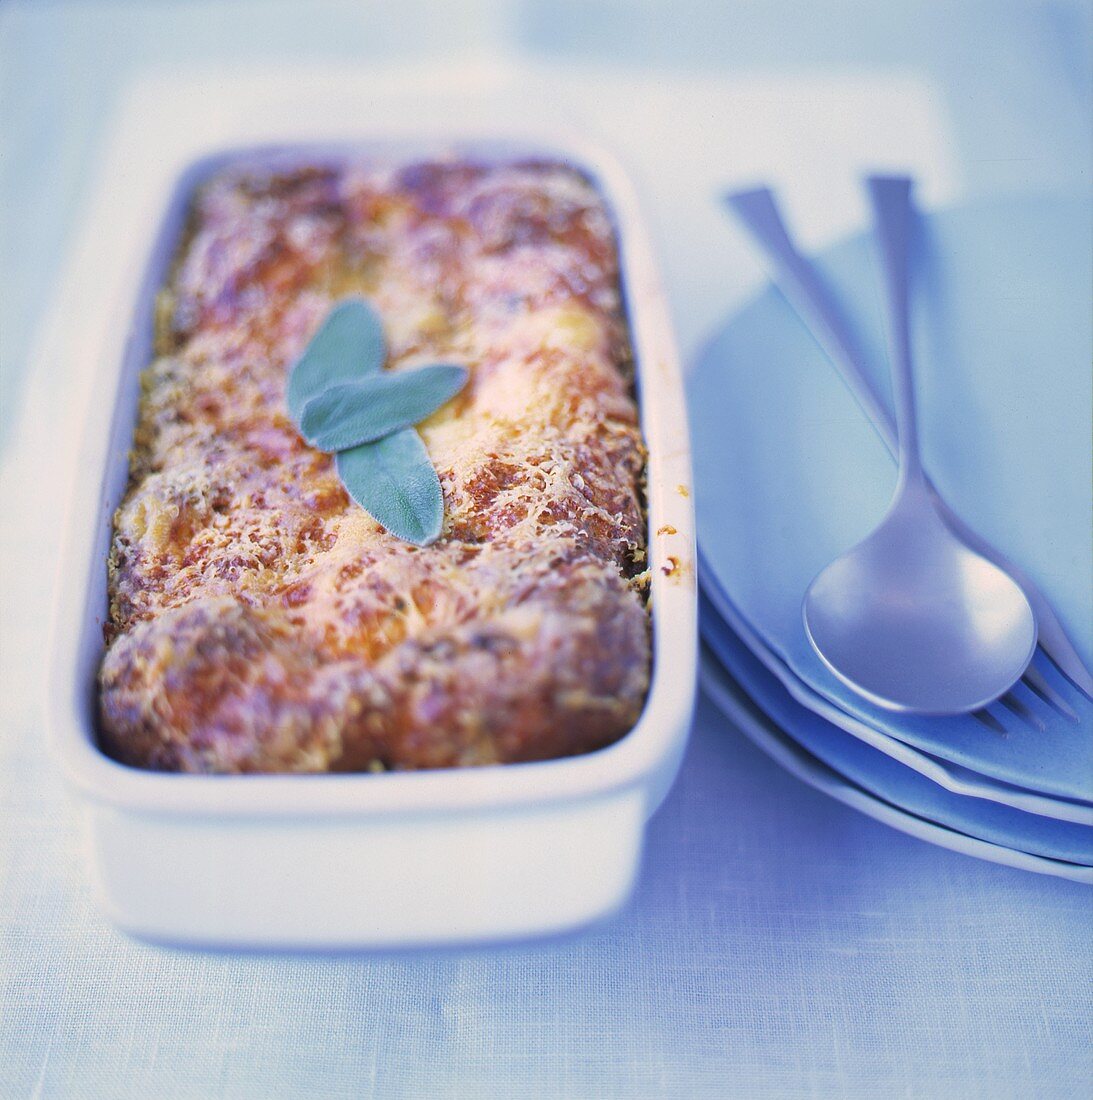 Bread pudding with sage leaves in a baking dish